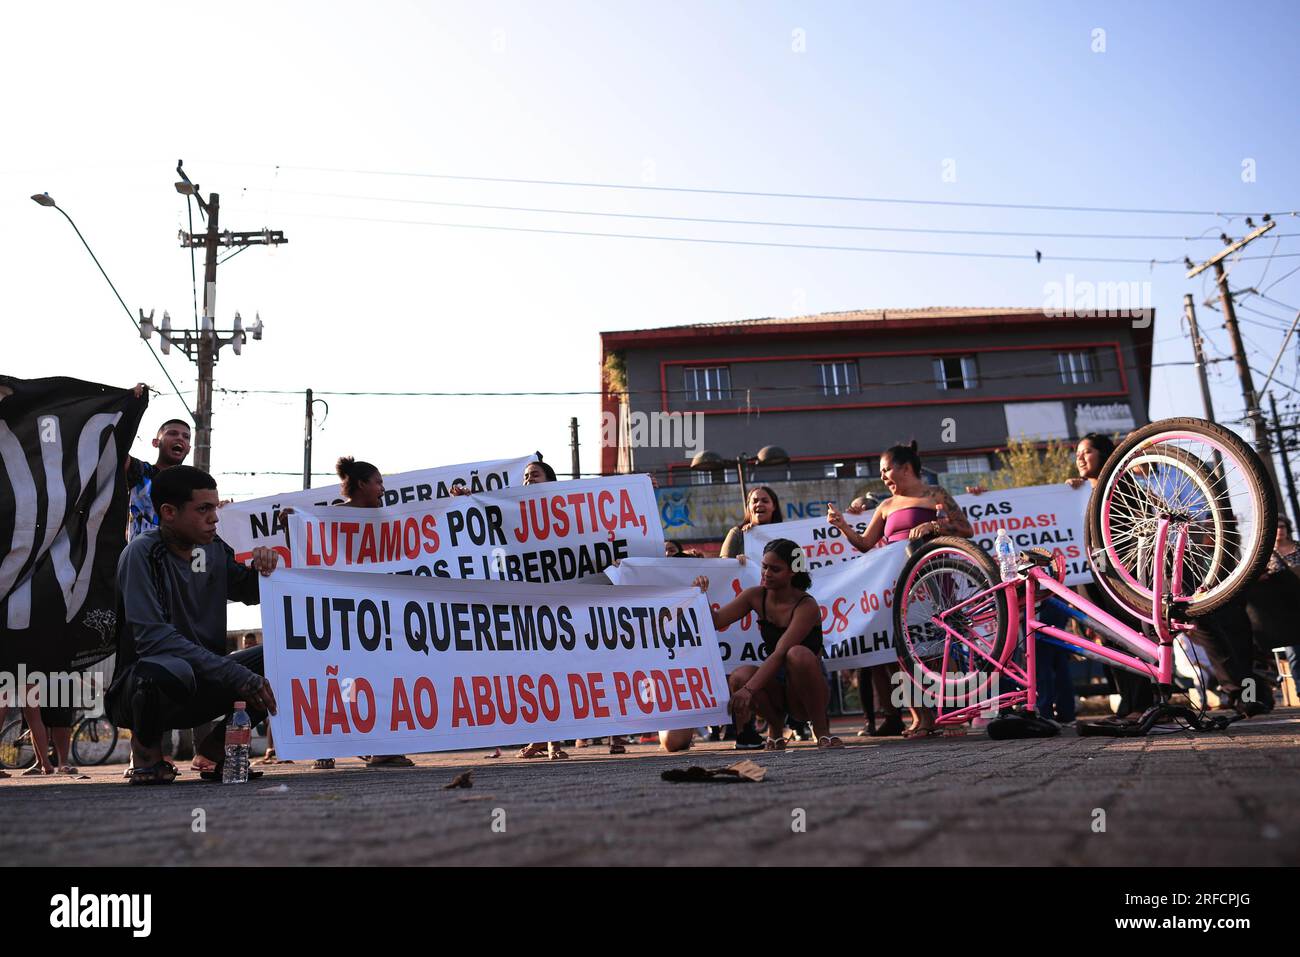 SP - GUARUJA - 08/02/2023 - GUARUJA, OPERATION ESCUDO - Protesters are seen with signs with the words &#x201c;Mourning! We want justice! No to abuse of power&#x201d; during an act against Operation Escudo, in Vicente de Carvalho, district of the city of Guaruja, this Wednesday (02). The Sao Paulo military police launched Operation Shield, strengthening policing and resulting in deaths in the cities of Santos and Guaruja in the Baixada Santista after a military police officer from ROTA, an elite troop of the Sao Paulo military police, was killed by a shotgun blast. fire during city tour. Photo: Stock Photo